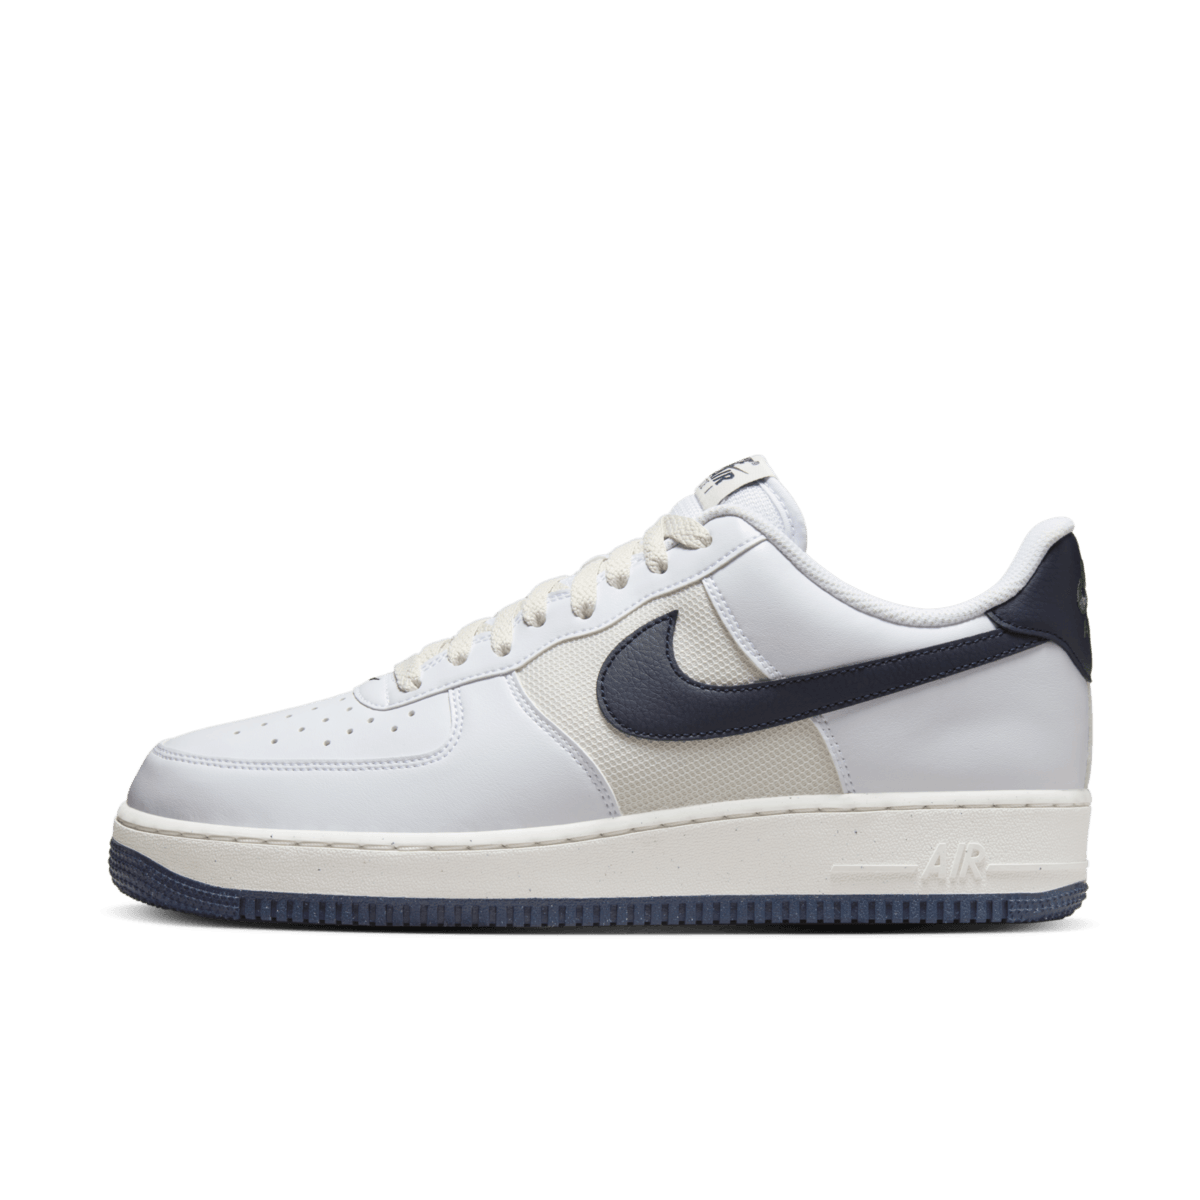 Nike Air Force 1 '07 'Obsidian' - Next Nature